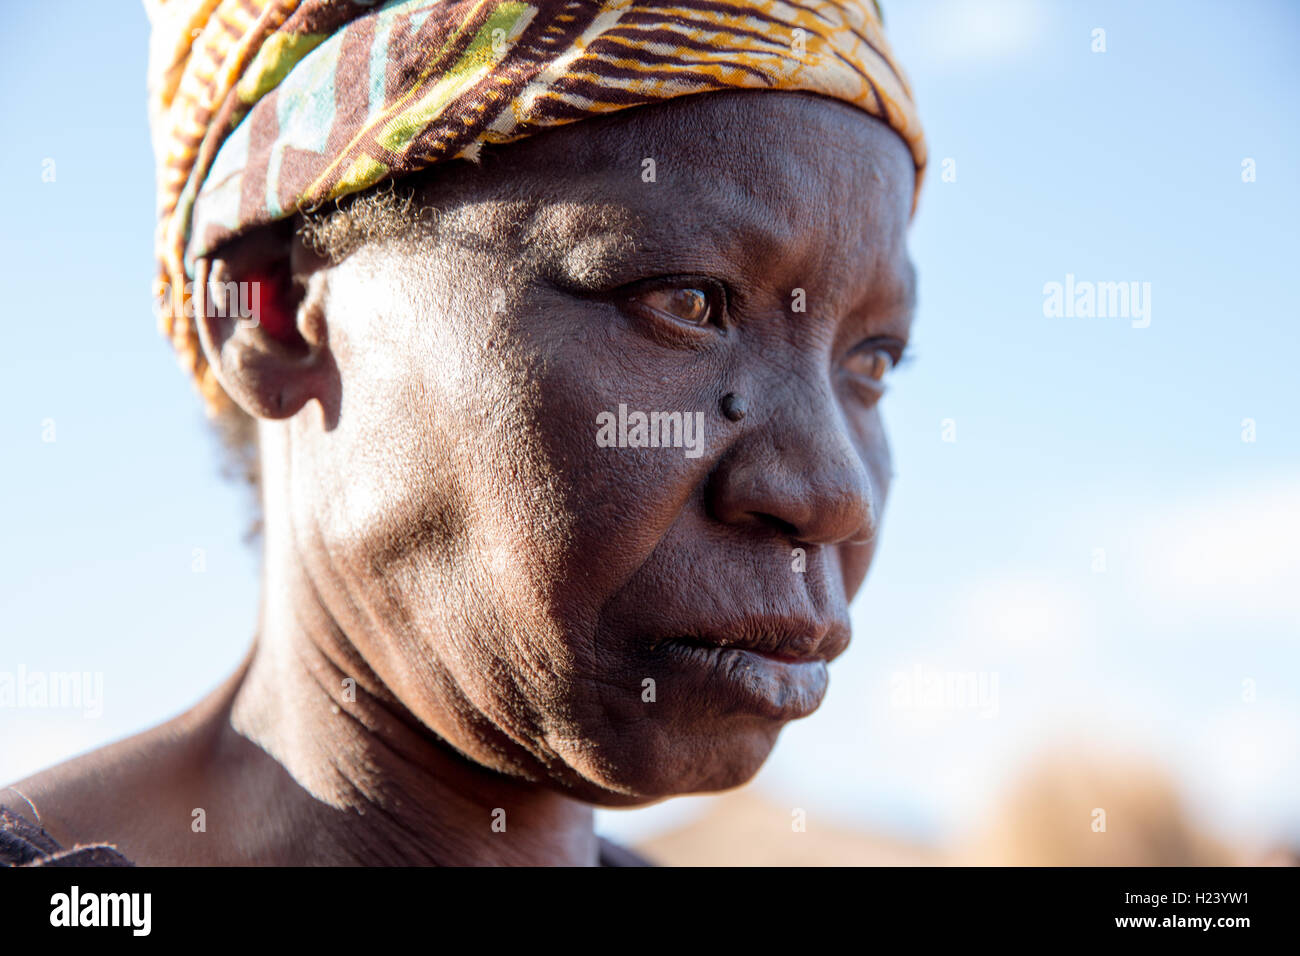 Namina village, Nampula Province, Mozambique, August 2015:  Maria Albino, 42, has been diagnosed with bilateral cataracts by the Nampula and Ribaue outreach team. She will have her cataratcs removed at Ribaue Hopsital. This project is supported by Sightsavers. Photo by Mike Goldwater Stock Photo